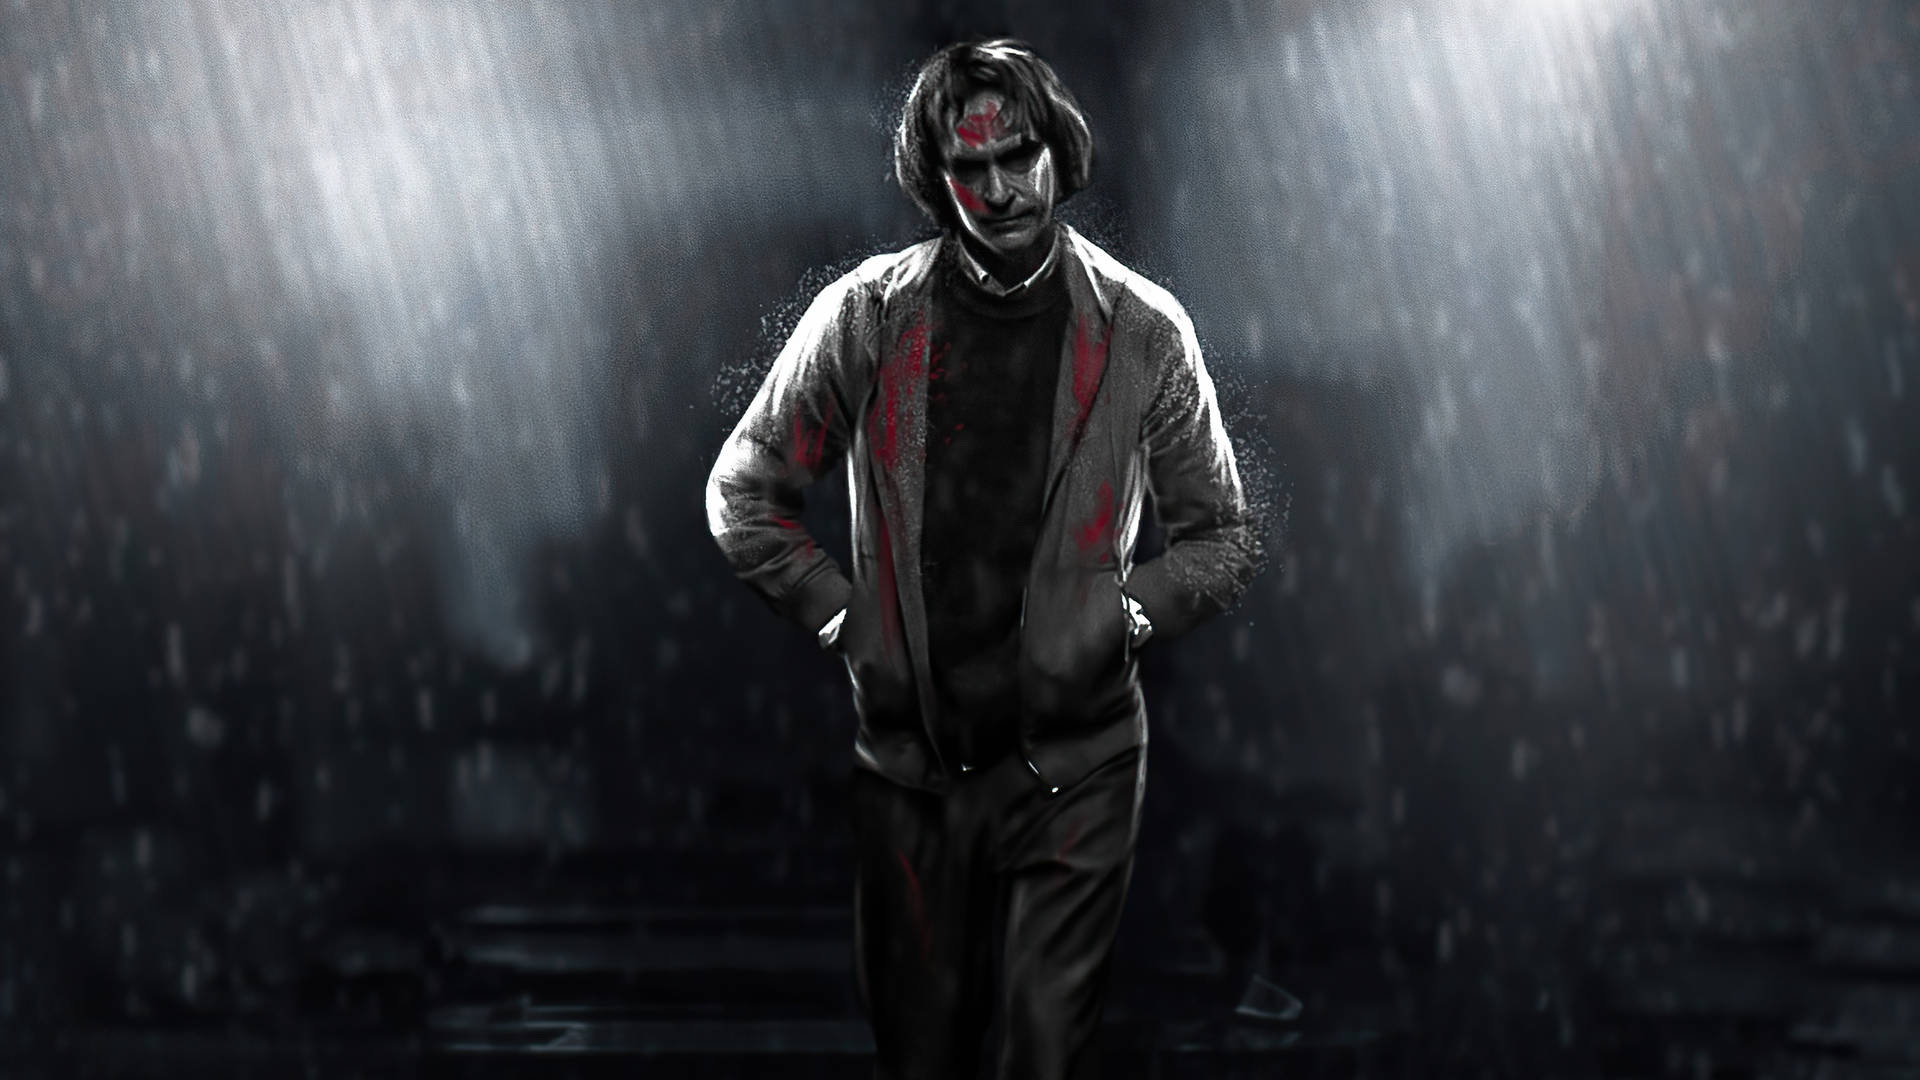 Black Ultra Hd Joker With Blood Stains